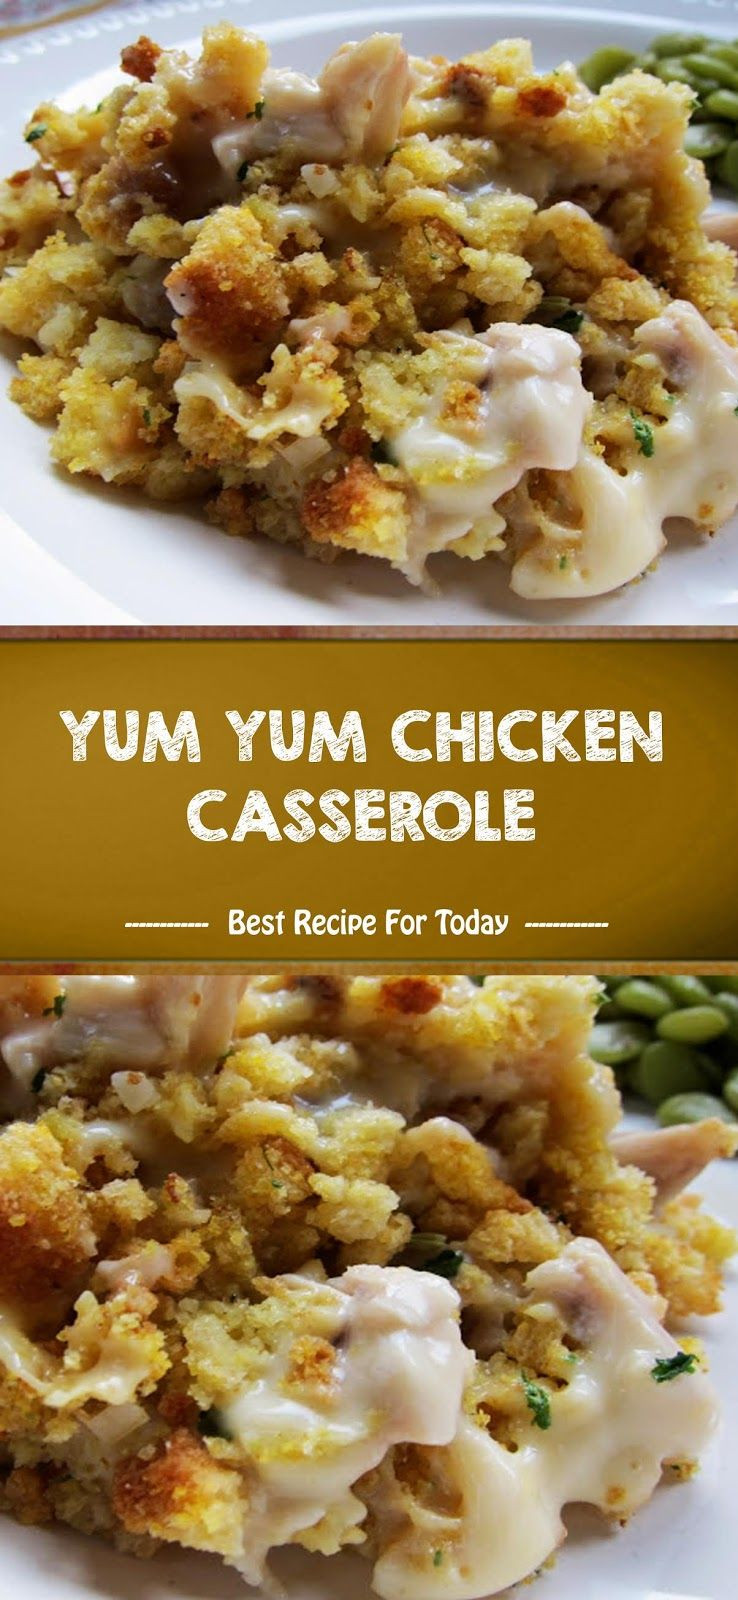 Chicken Casserole With Pepperidge Farm Stuffing And Sour Cream
 YUM YUM CHICKEN CASSEROLE in 2020 With images